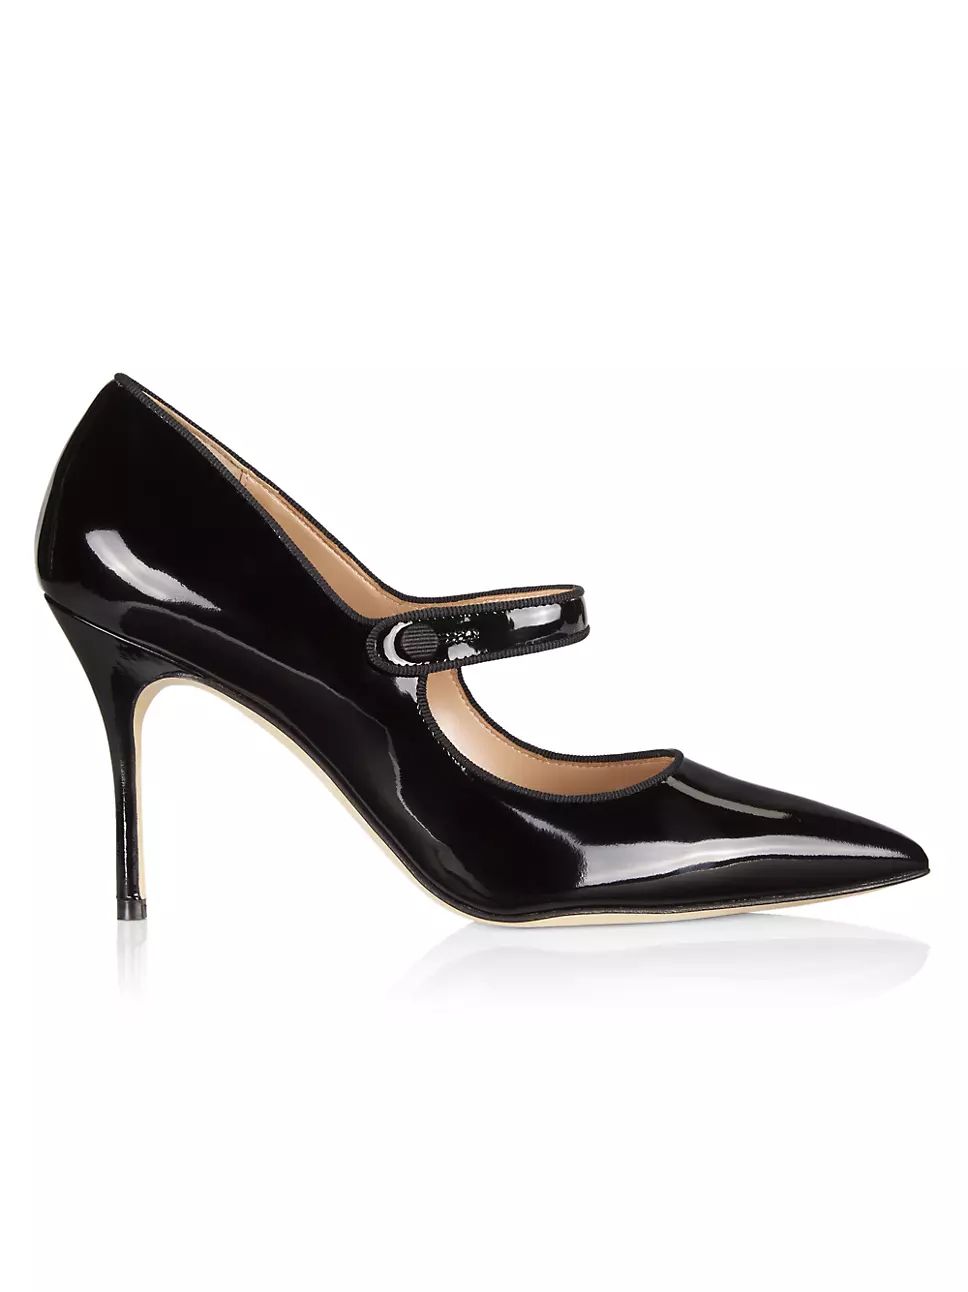 Campari 90MM Patent Leather Mary Jane Pumps | Saks Fifth Avenue